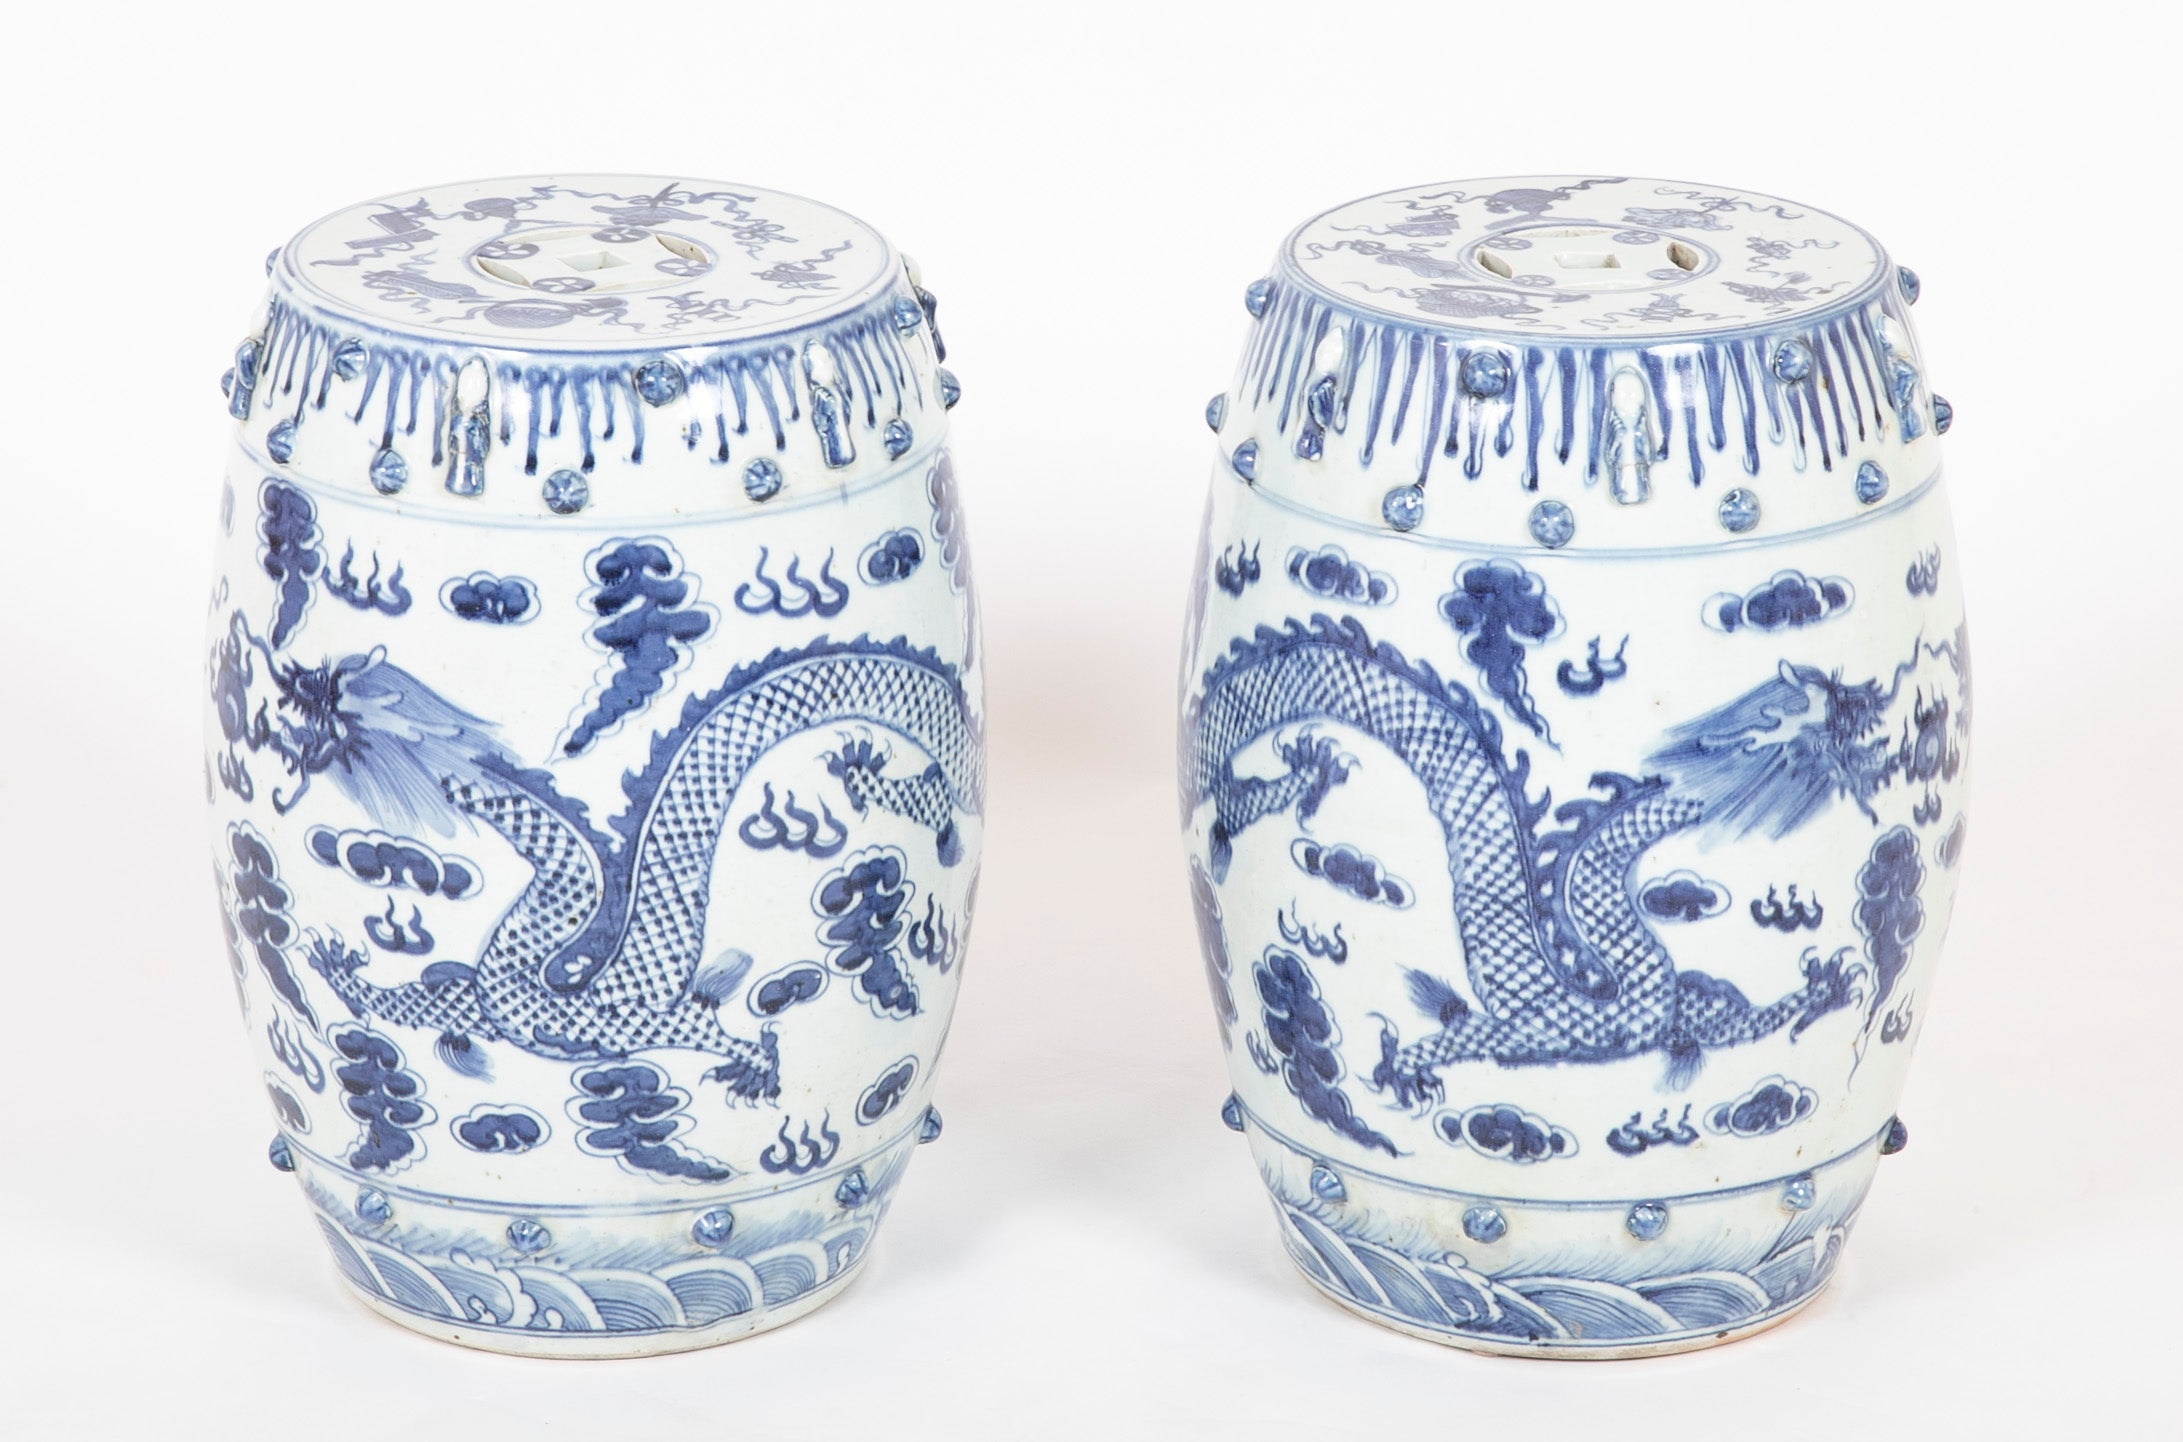 Pair of Chinese Export Blue & White Garden Stools